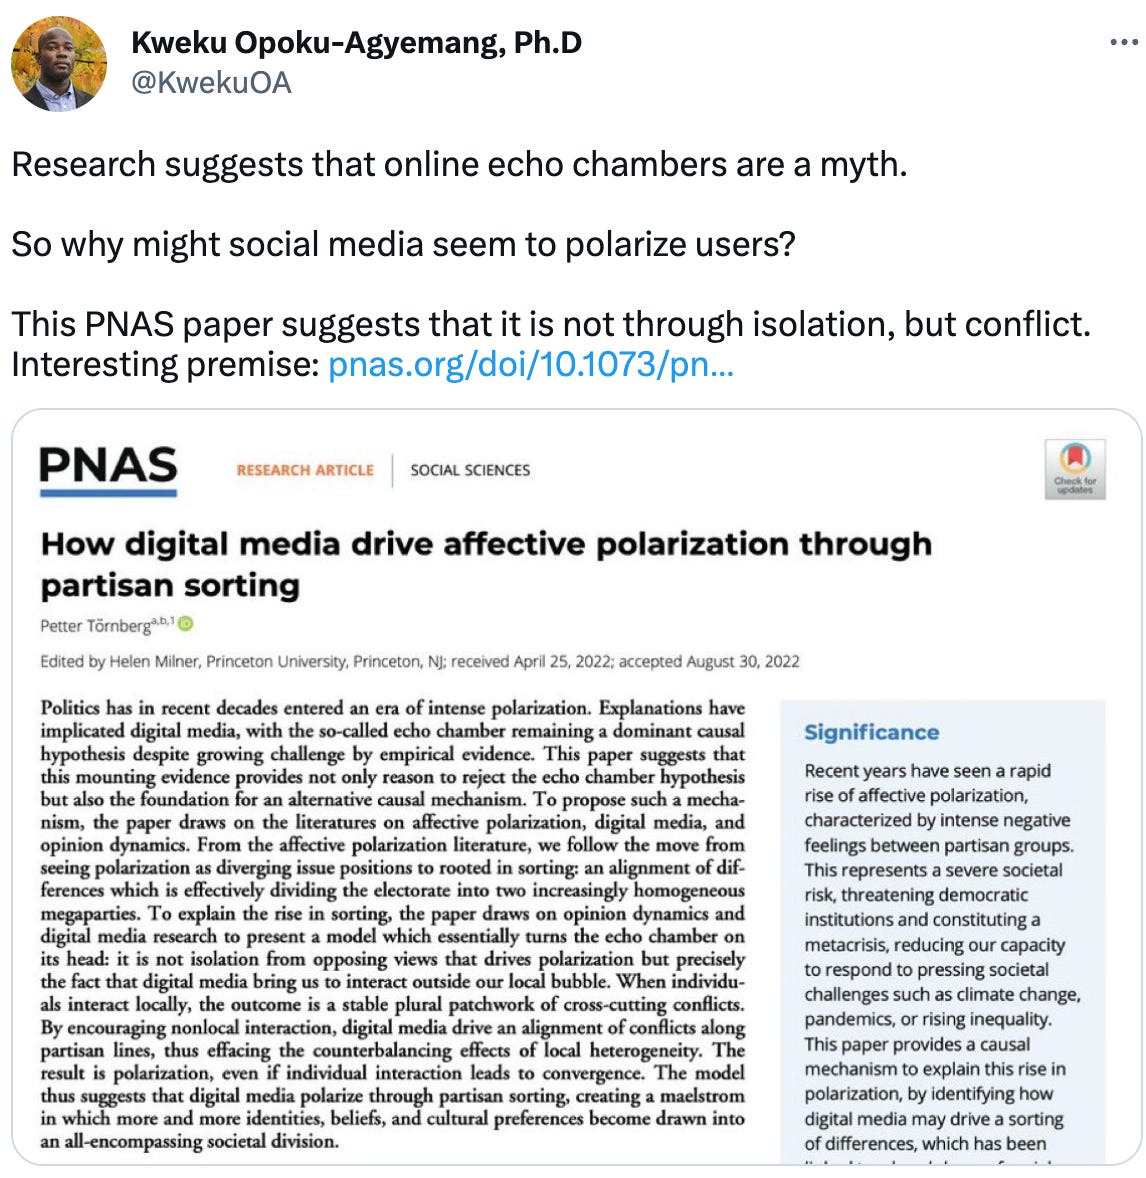  Kweku Opoku-Agyemang, Ph.D @KwekuOA Research suggests that online echo chambers are a myth.  So why might social media seem to polarize users?   This PNAS paper suggests that it is not through isolation, but conflict. Interesting premise: https://pnas.org/doi/10.1073/pnas.2207159119